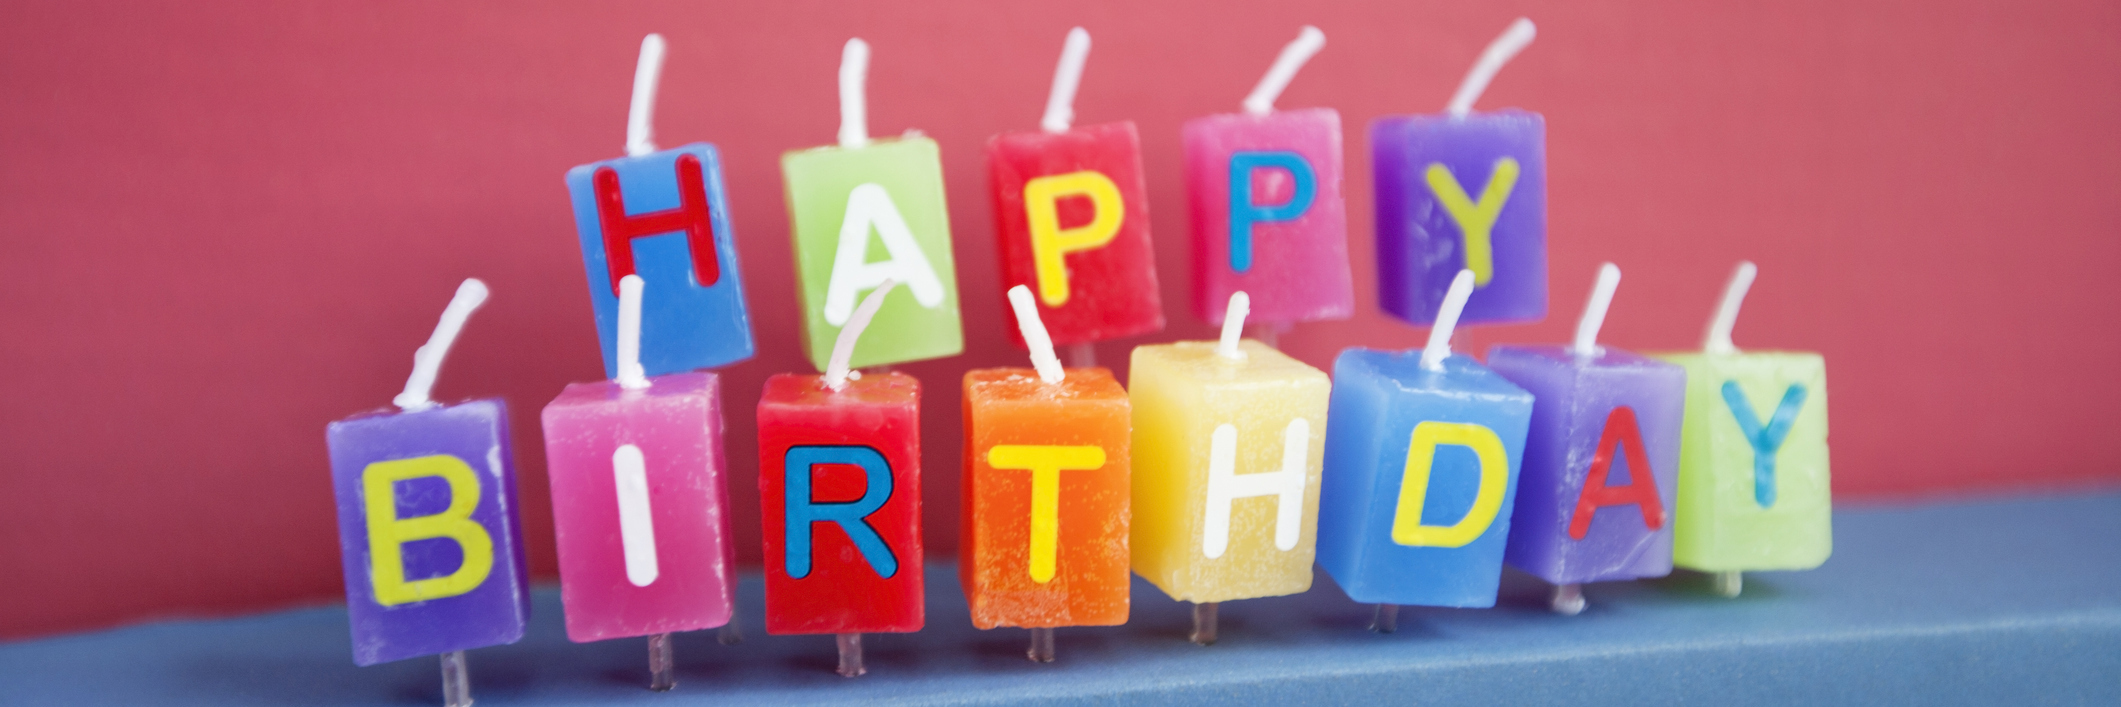 Unlit birthday candles over colored background